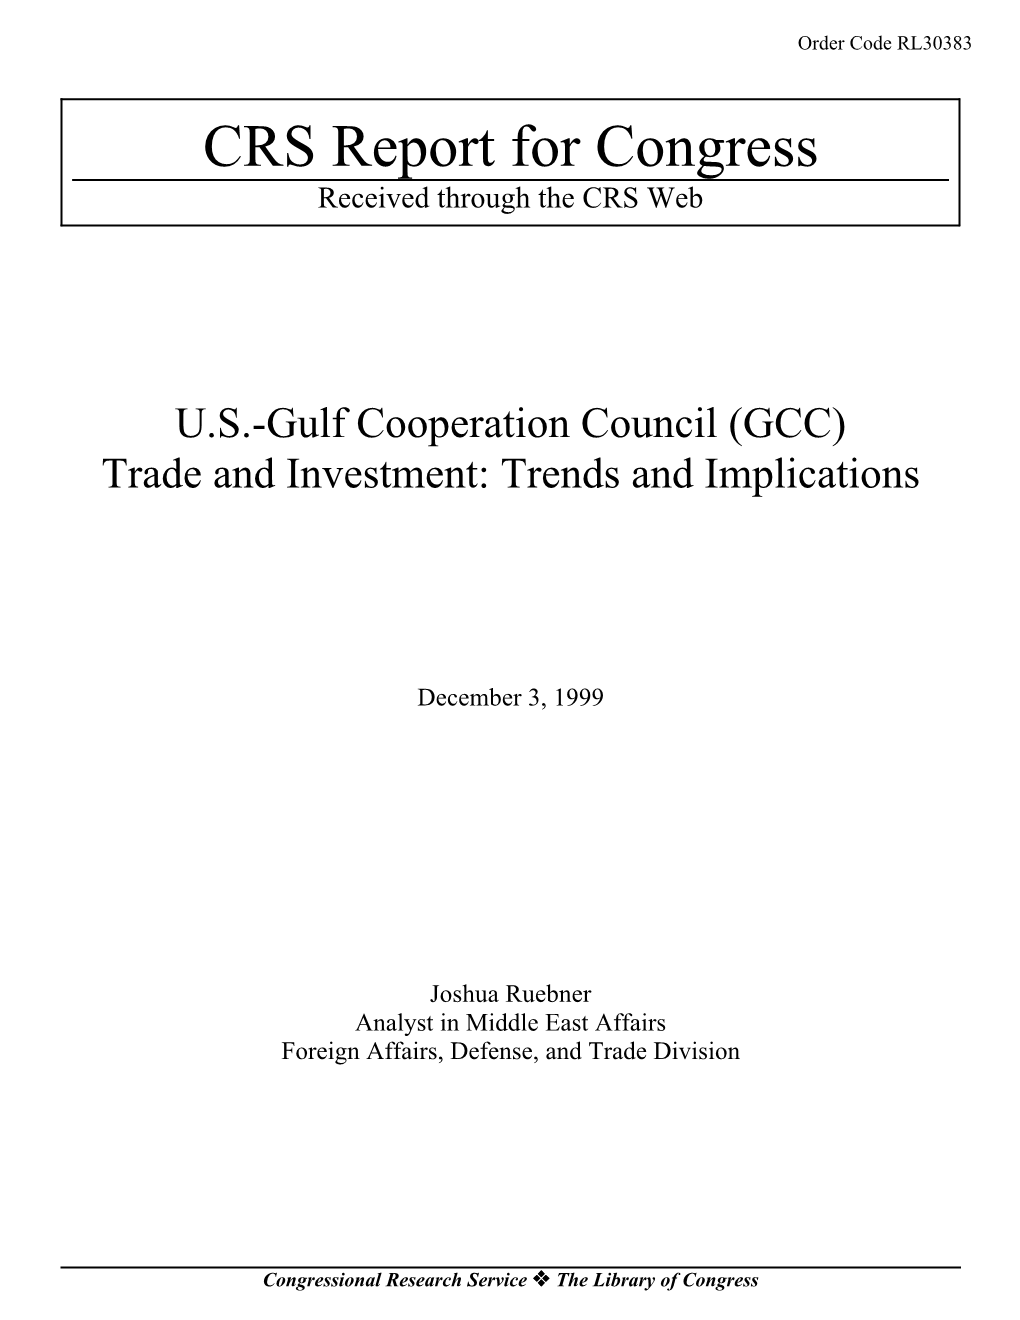 GCC Customs Union, and the Encouragement of Foreign Direct Investment (FDI)